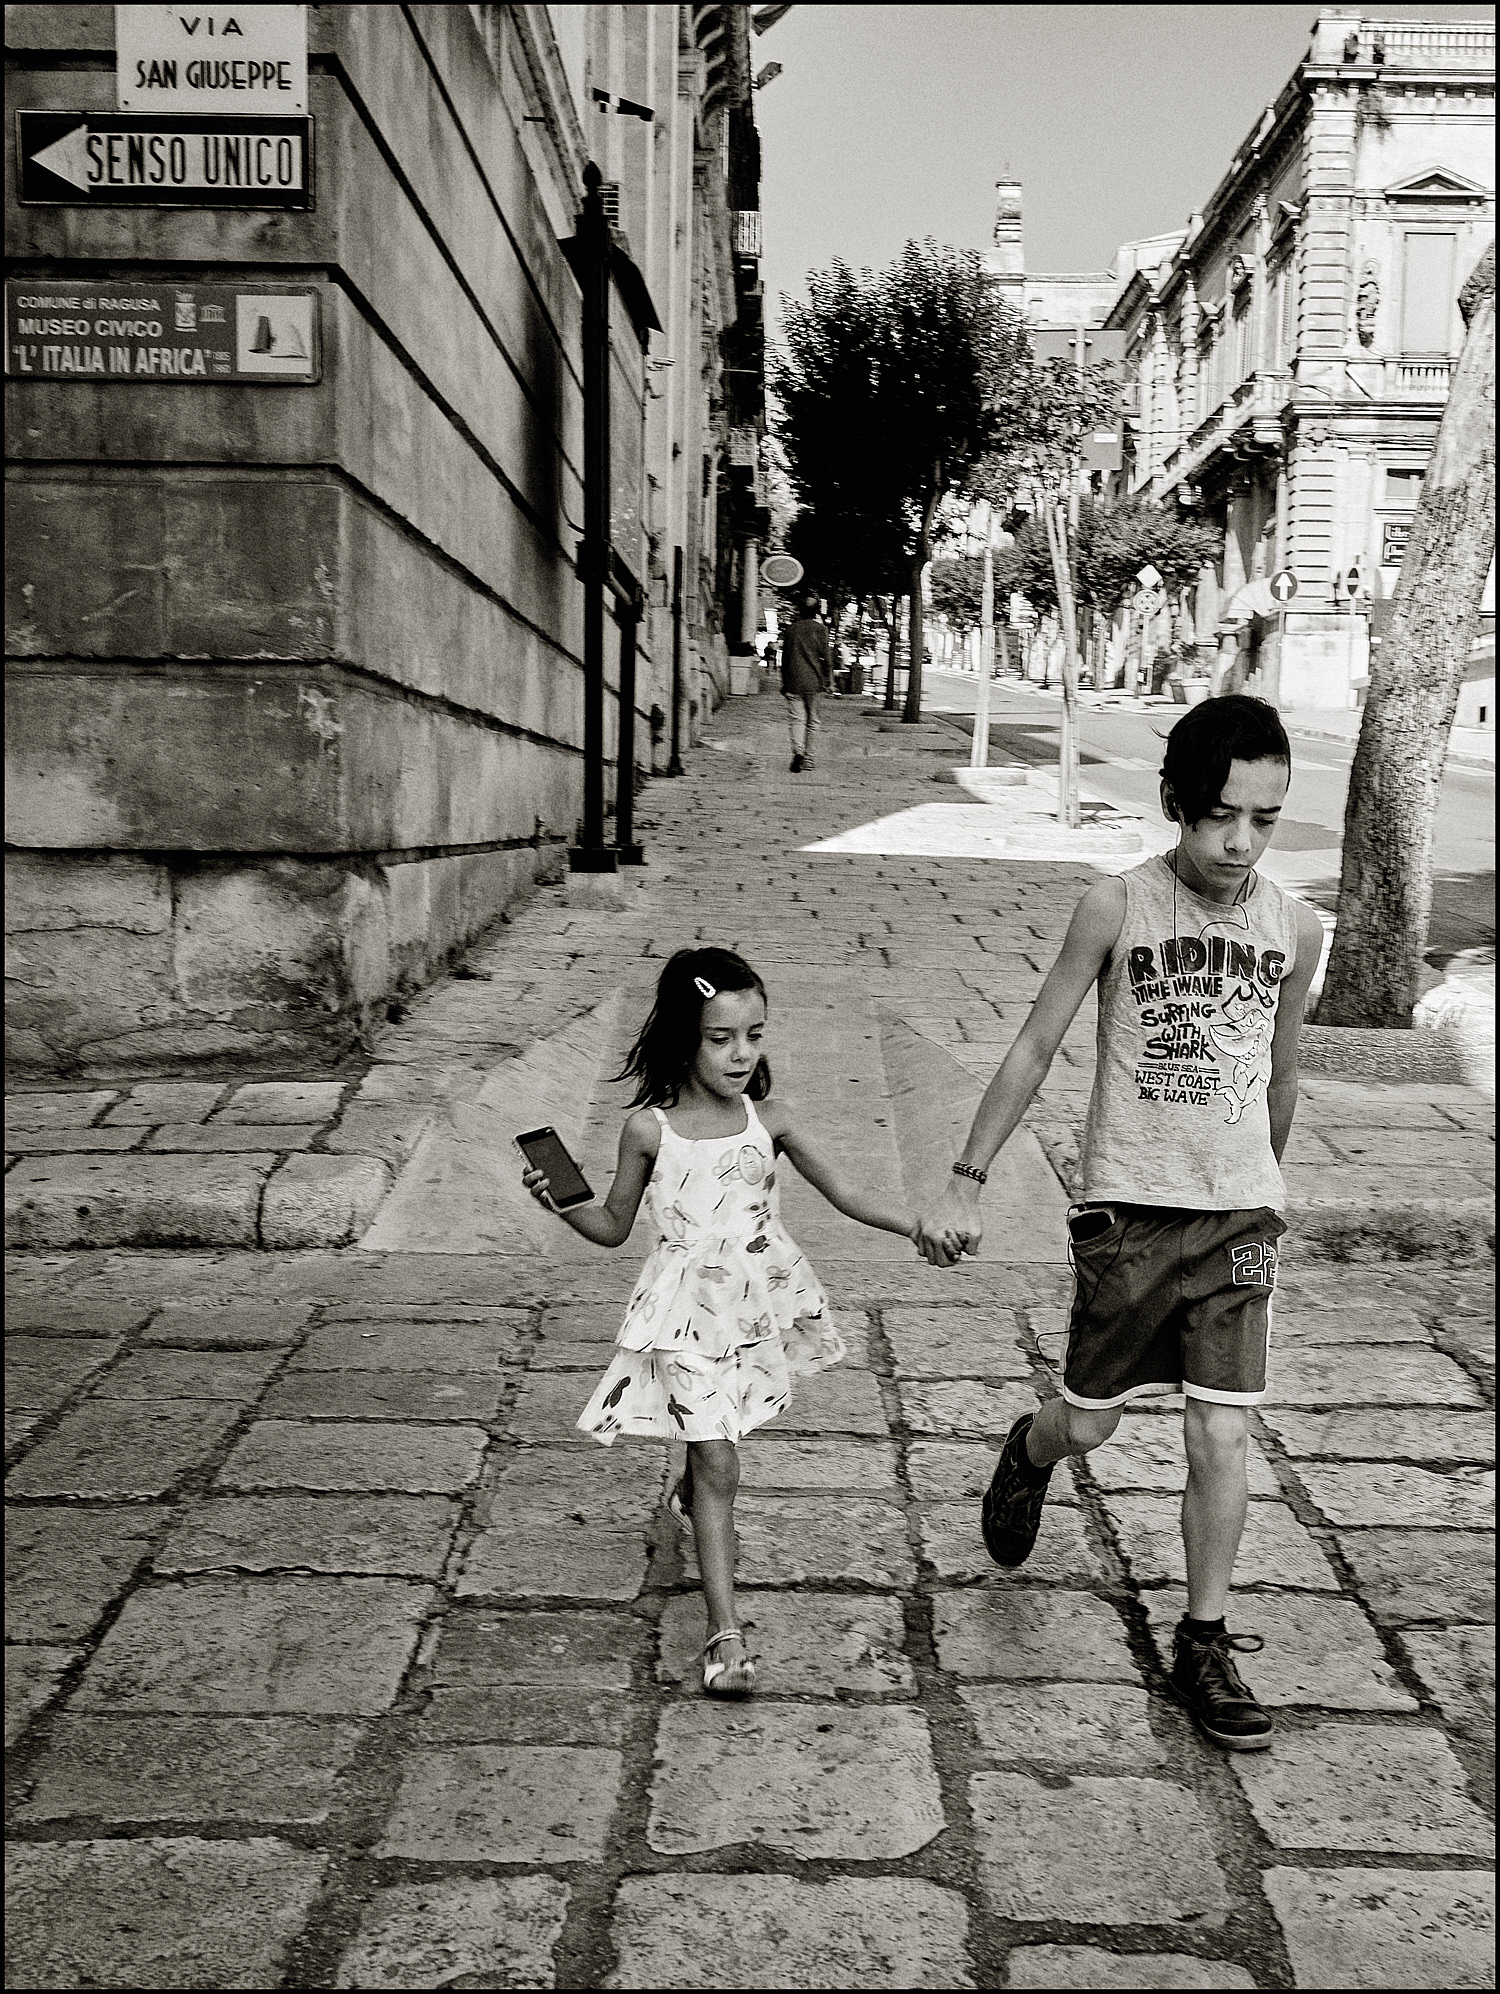 Walking with his sis...